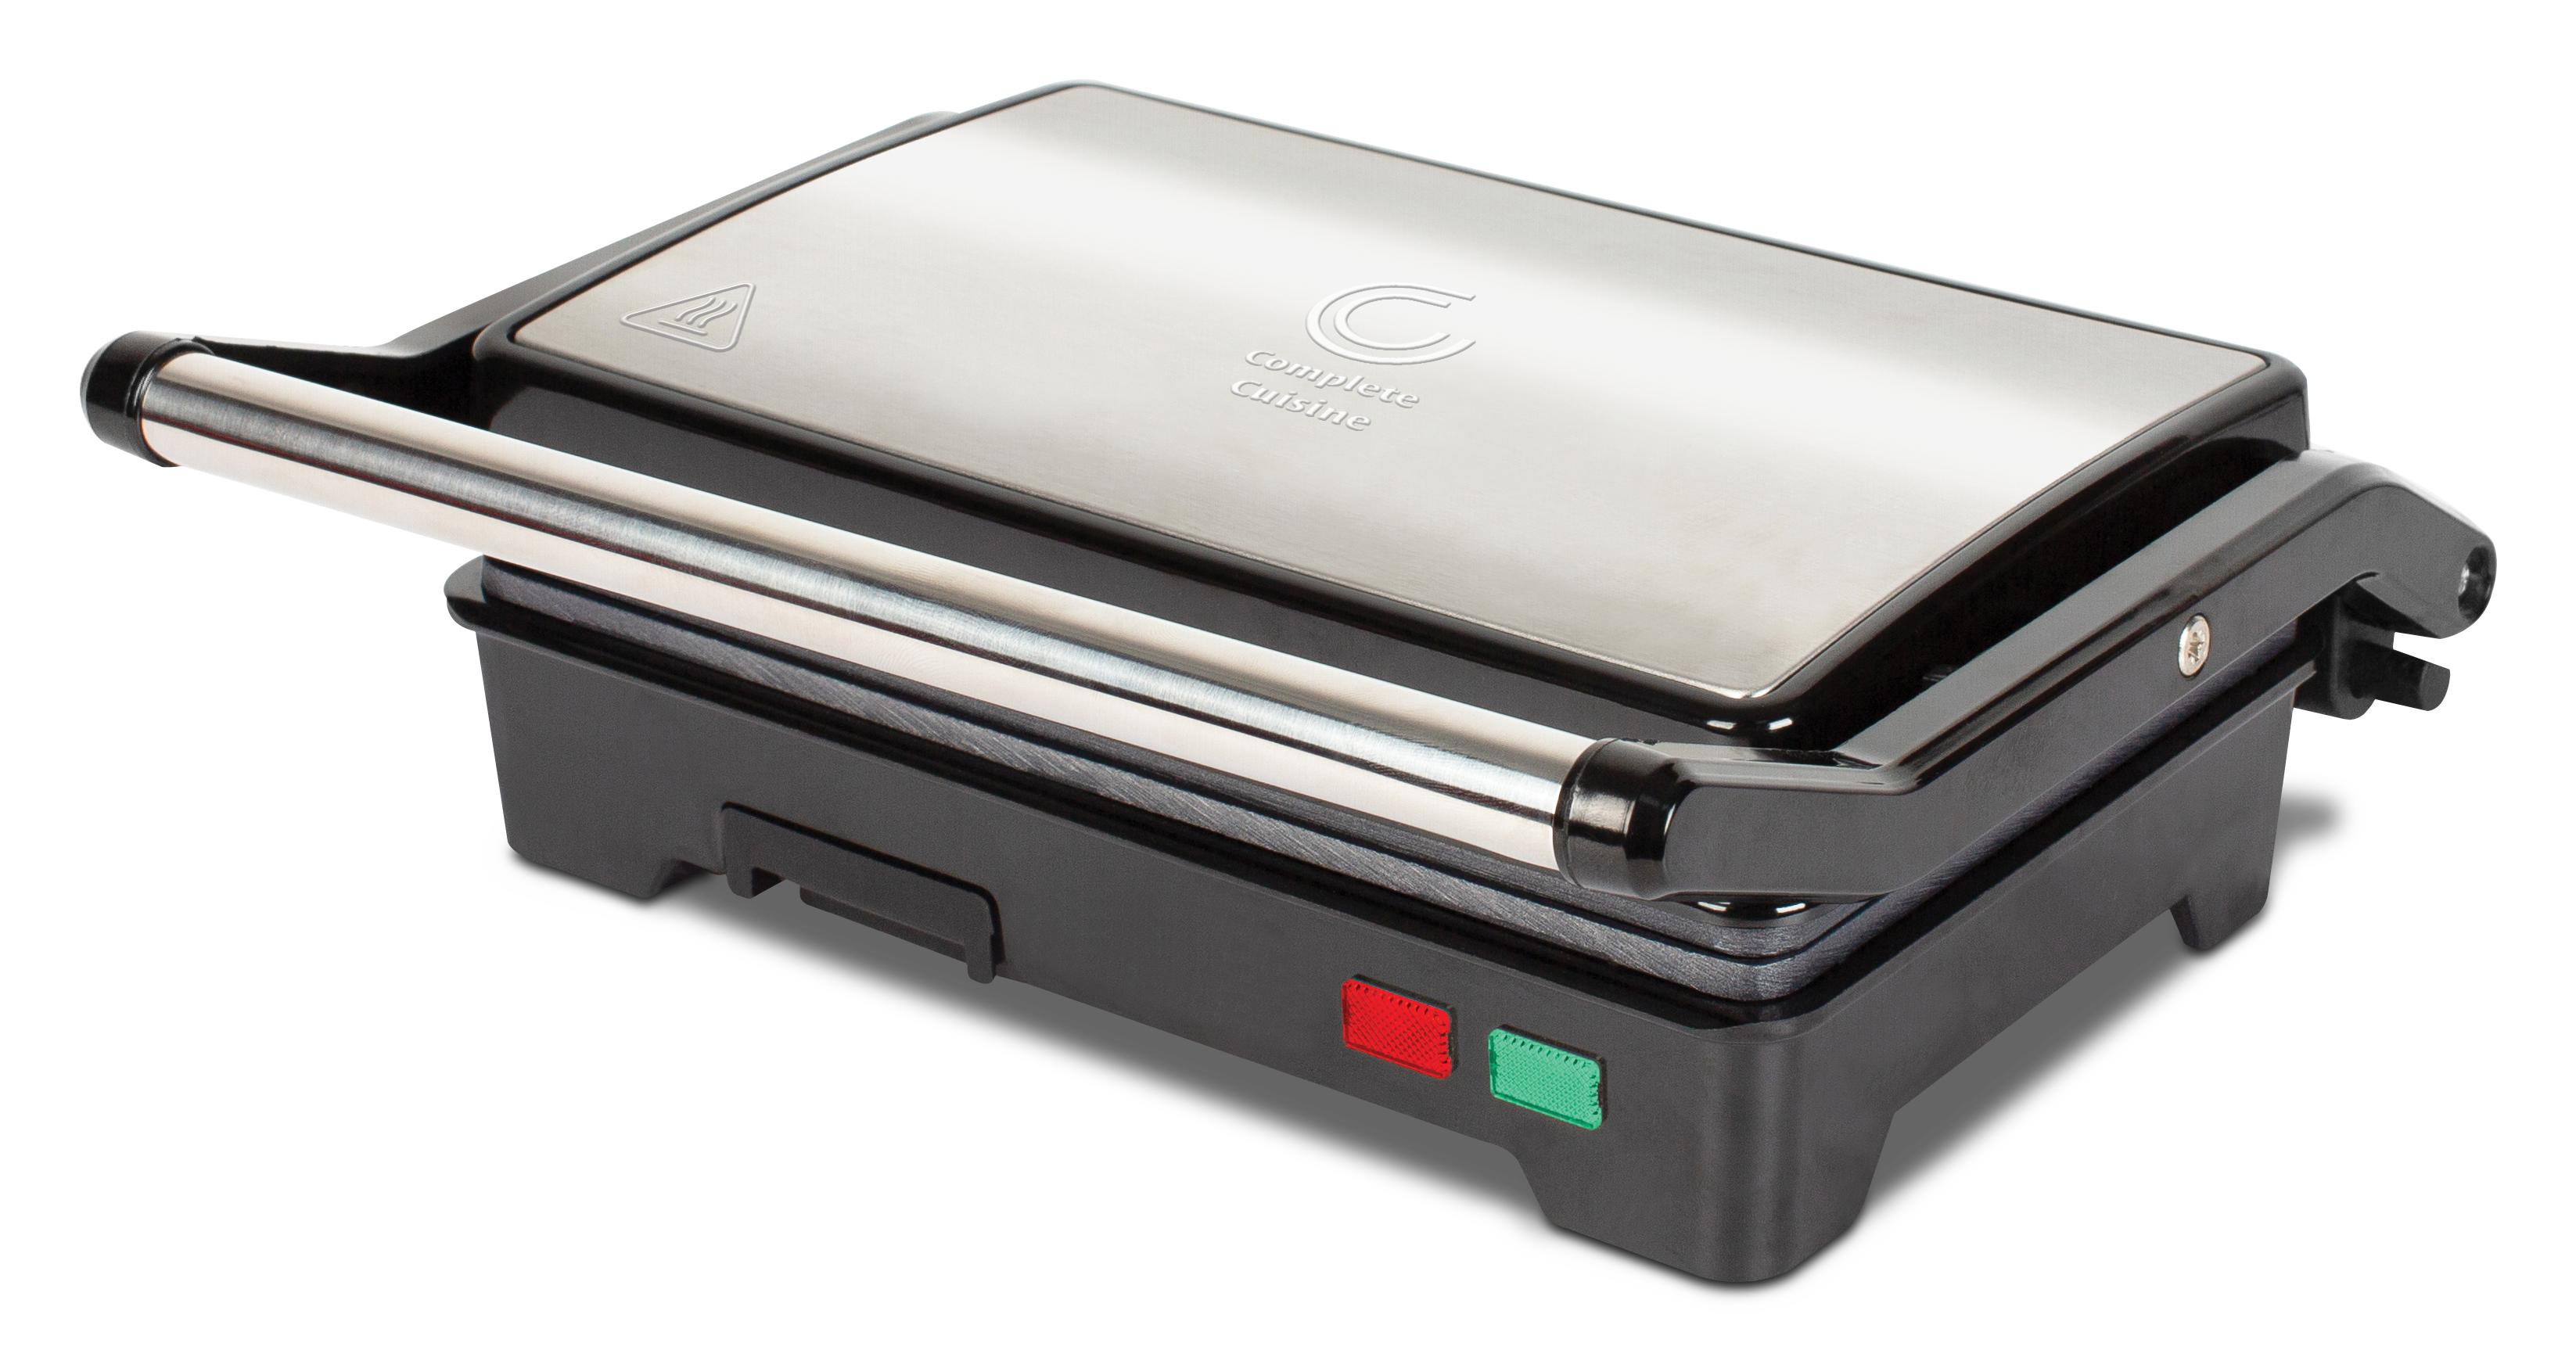 Complete Cuisine 3-in-1 Stainless Steel Ultra Grill, Opens 180 Degrees for Any Size Food